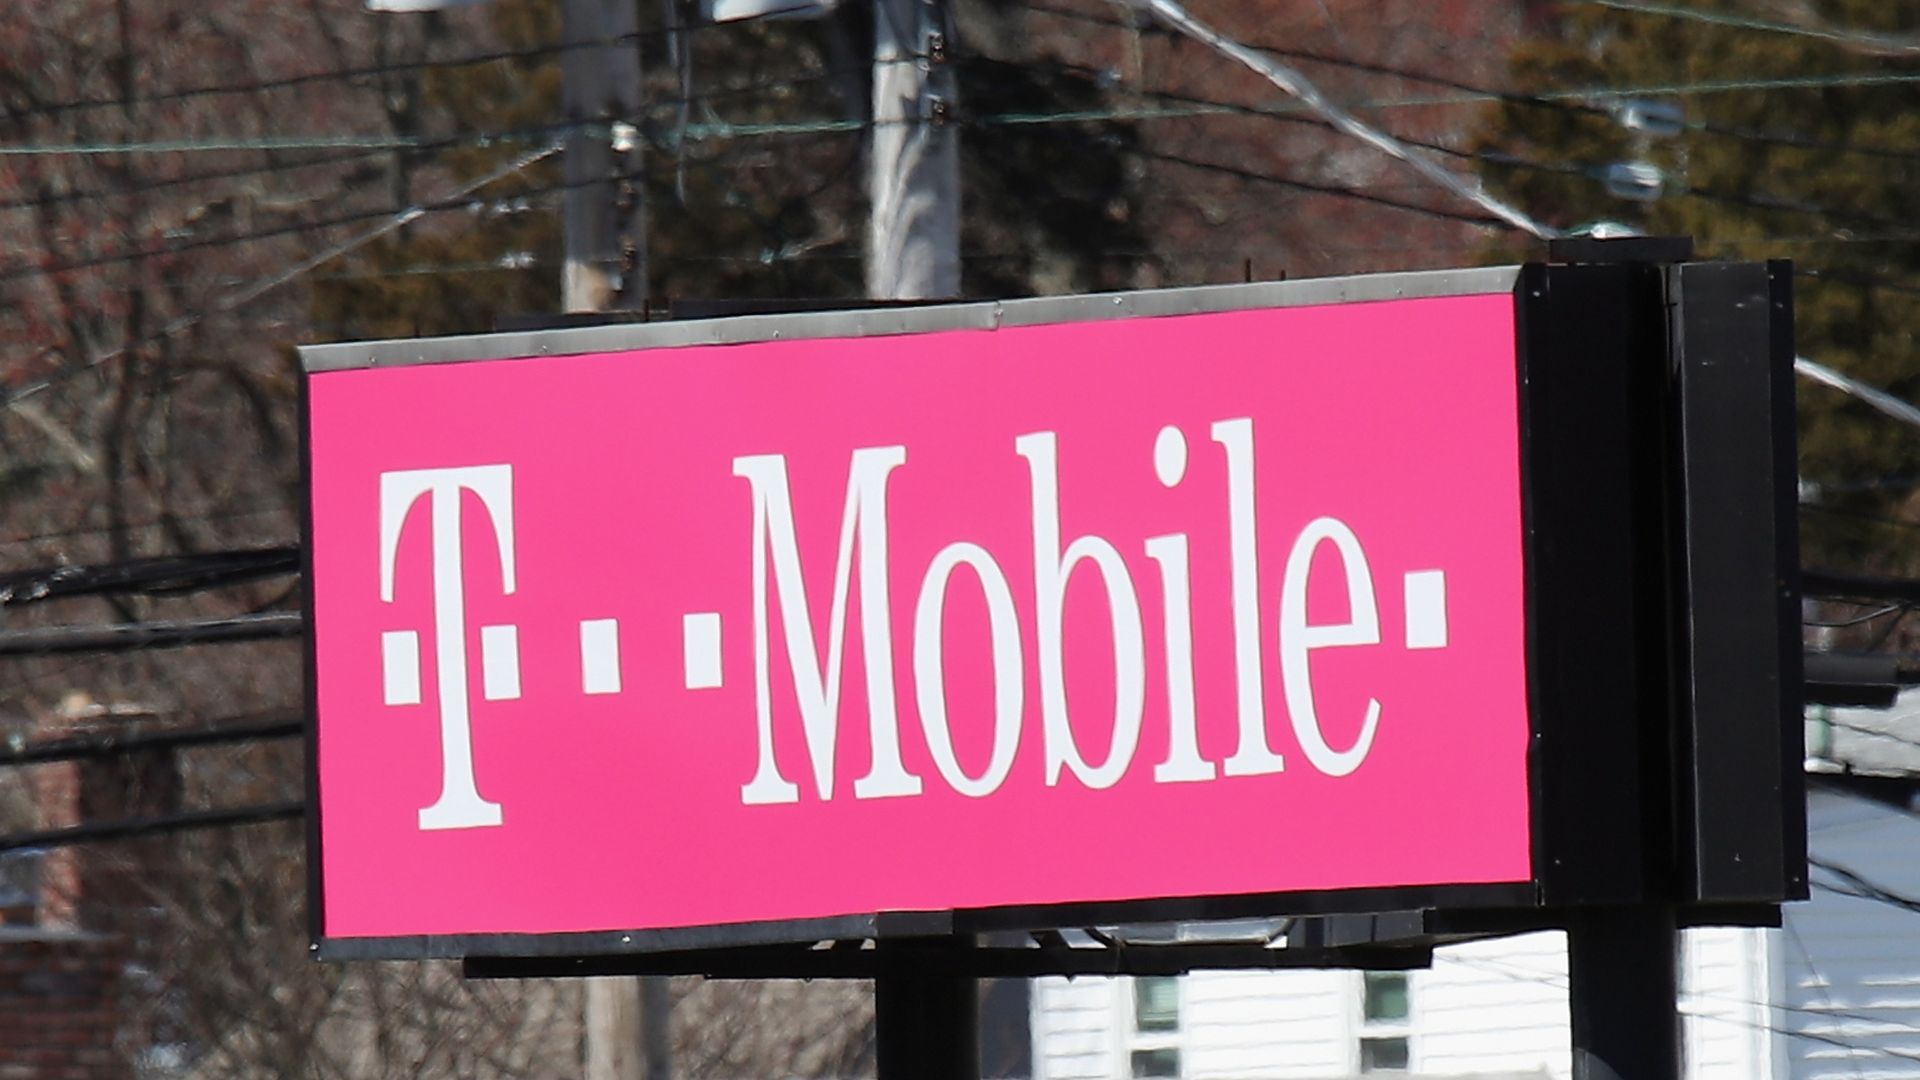 the T-mobile sign 